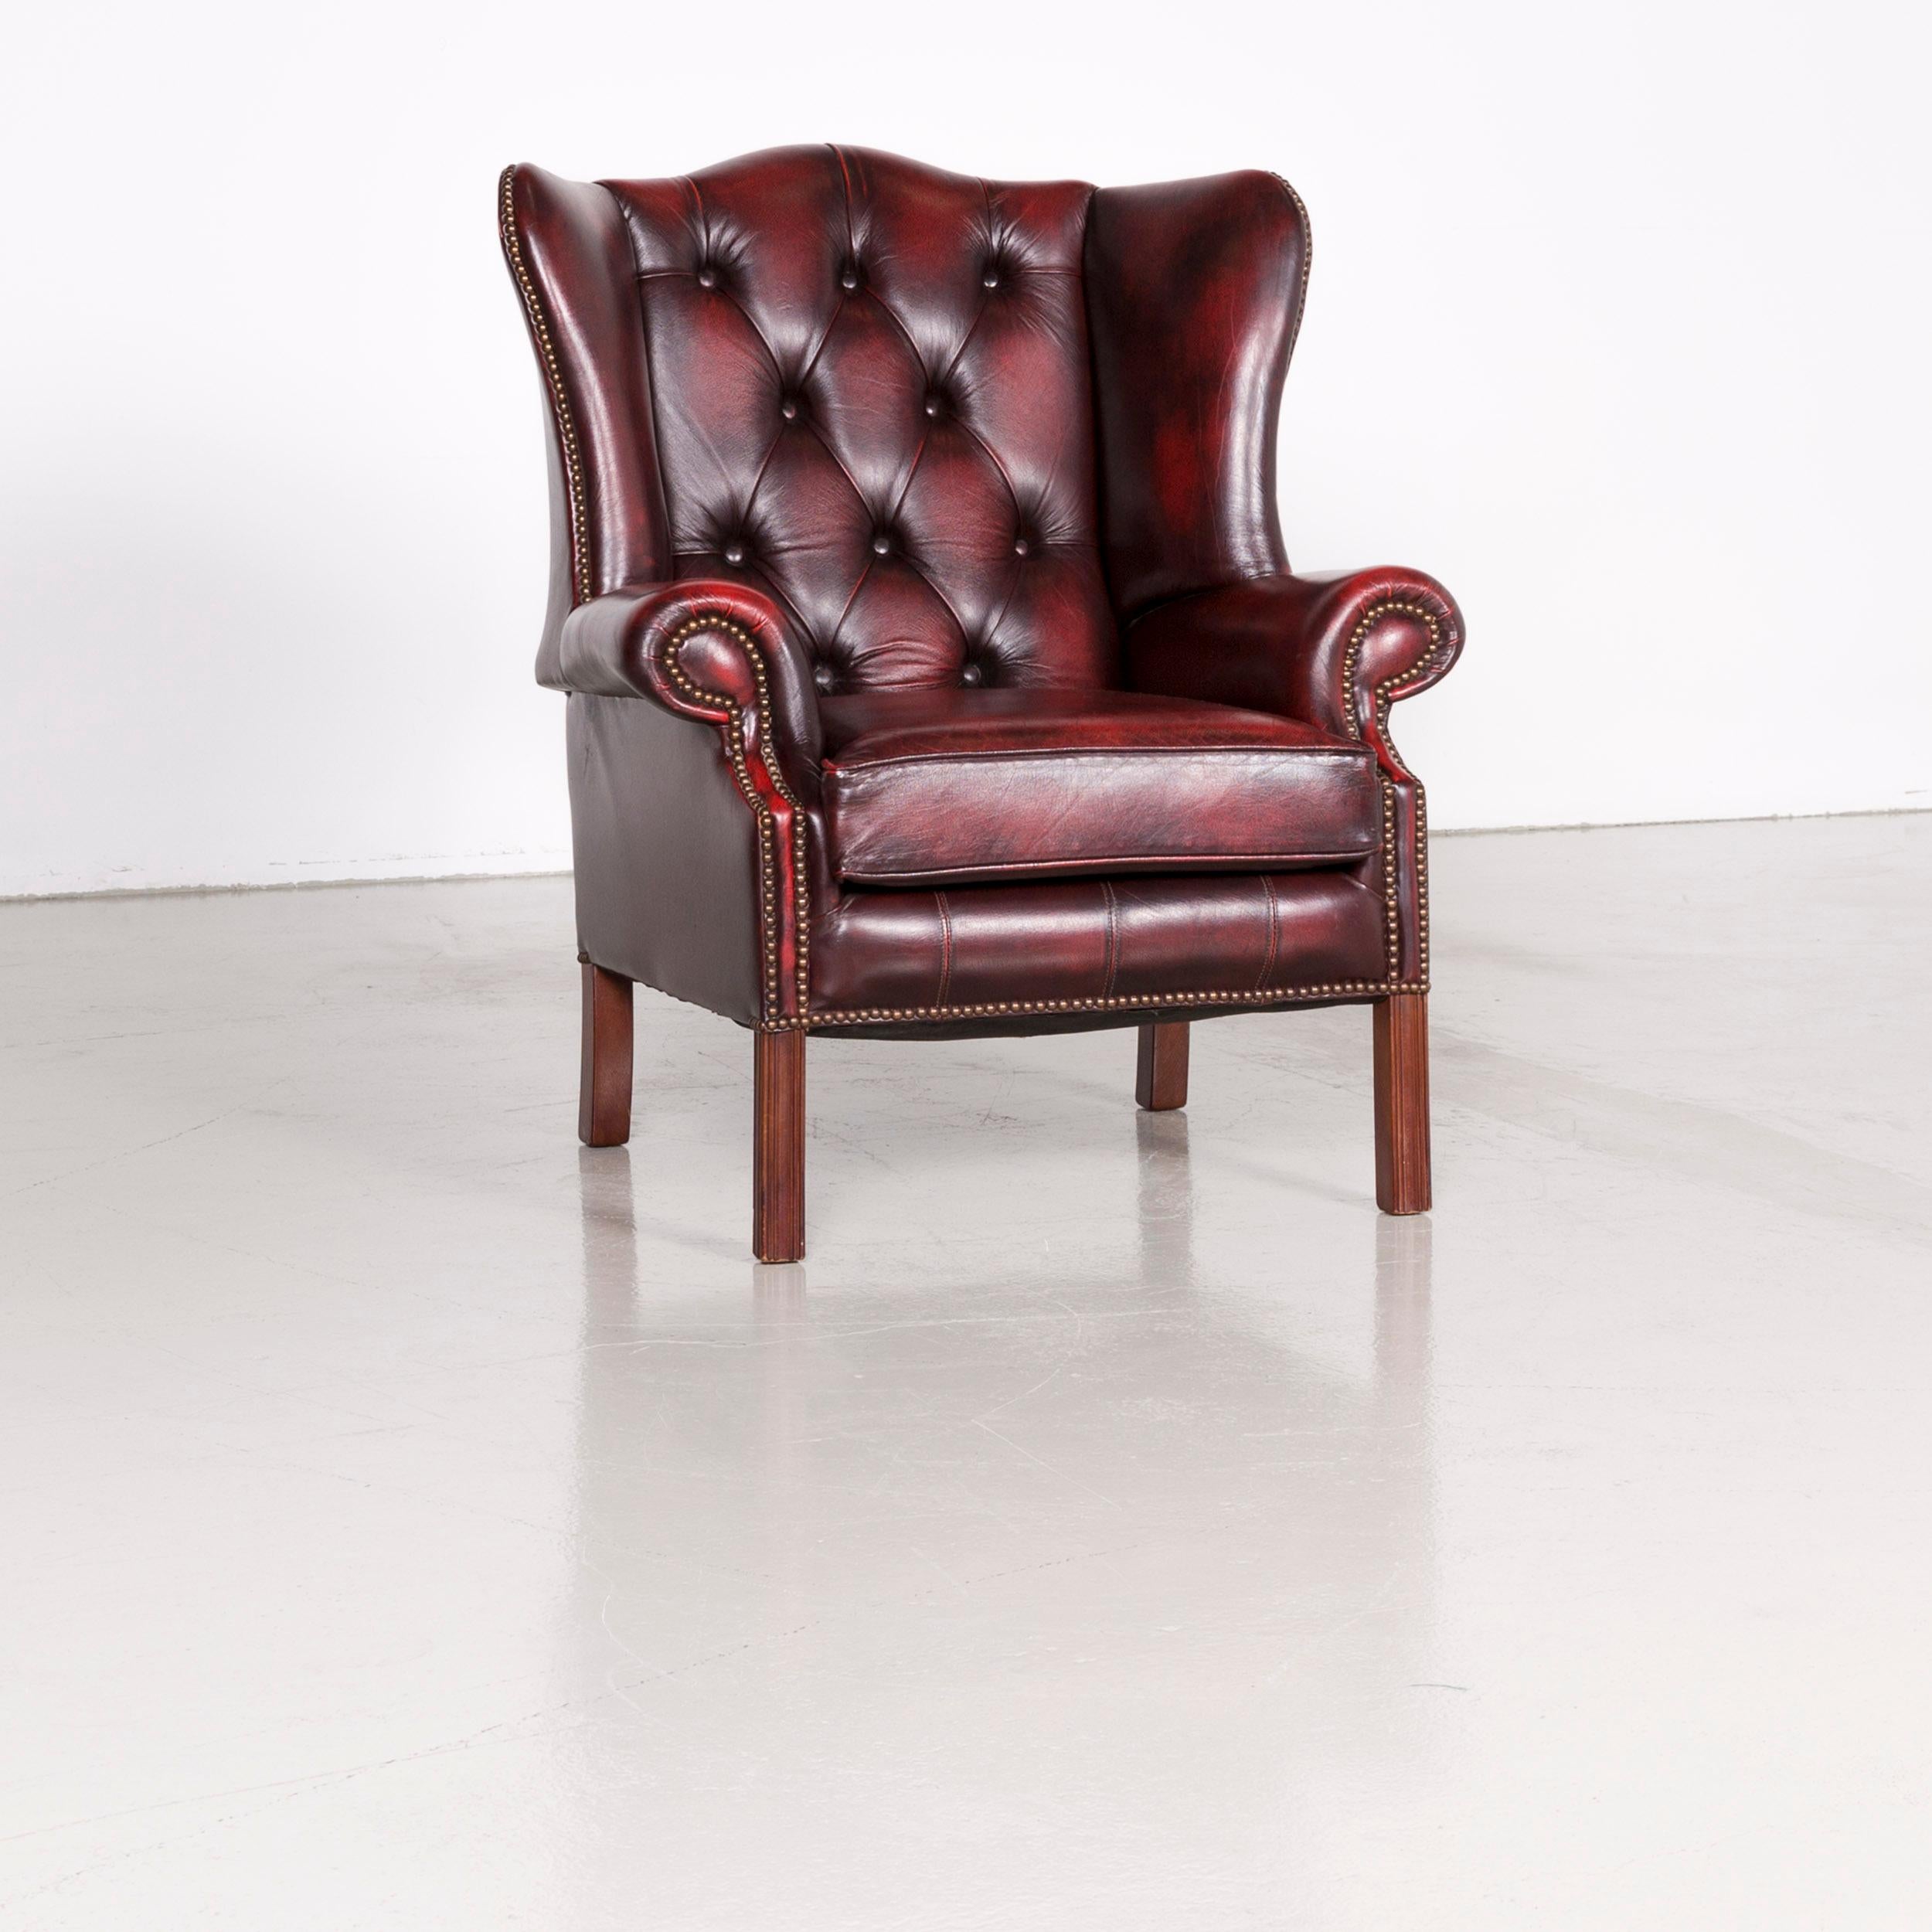 We bring to you a Centurion Chesterfield leather armchair footstool set red vintage.